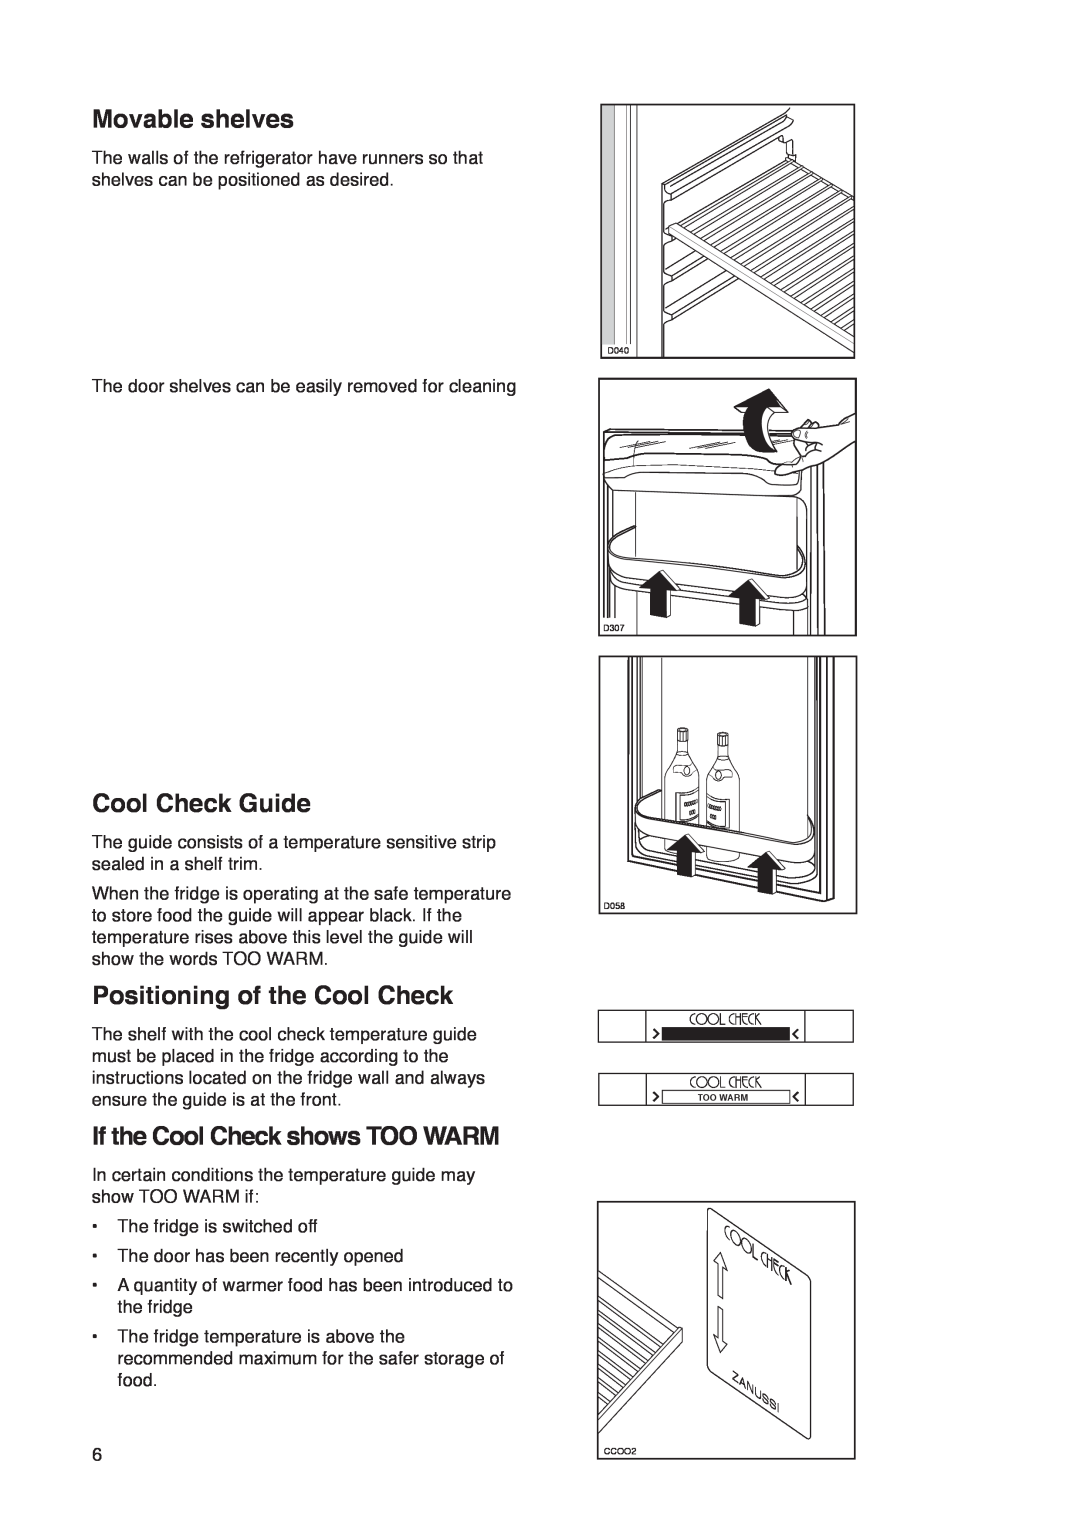 Zanussi ZK 53/37 R Movable shelves, Cool Check Guide, Positioning of the Cool Check, If the Cool Check shows TOO WARM 